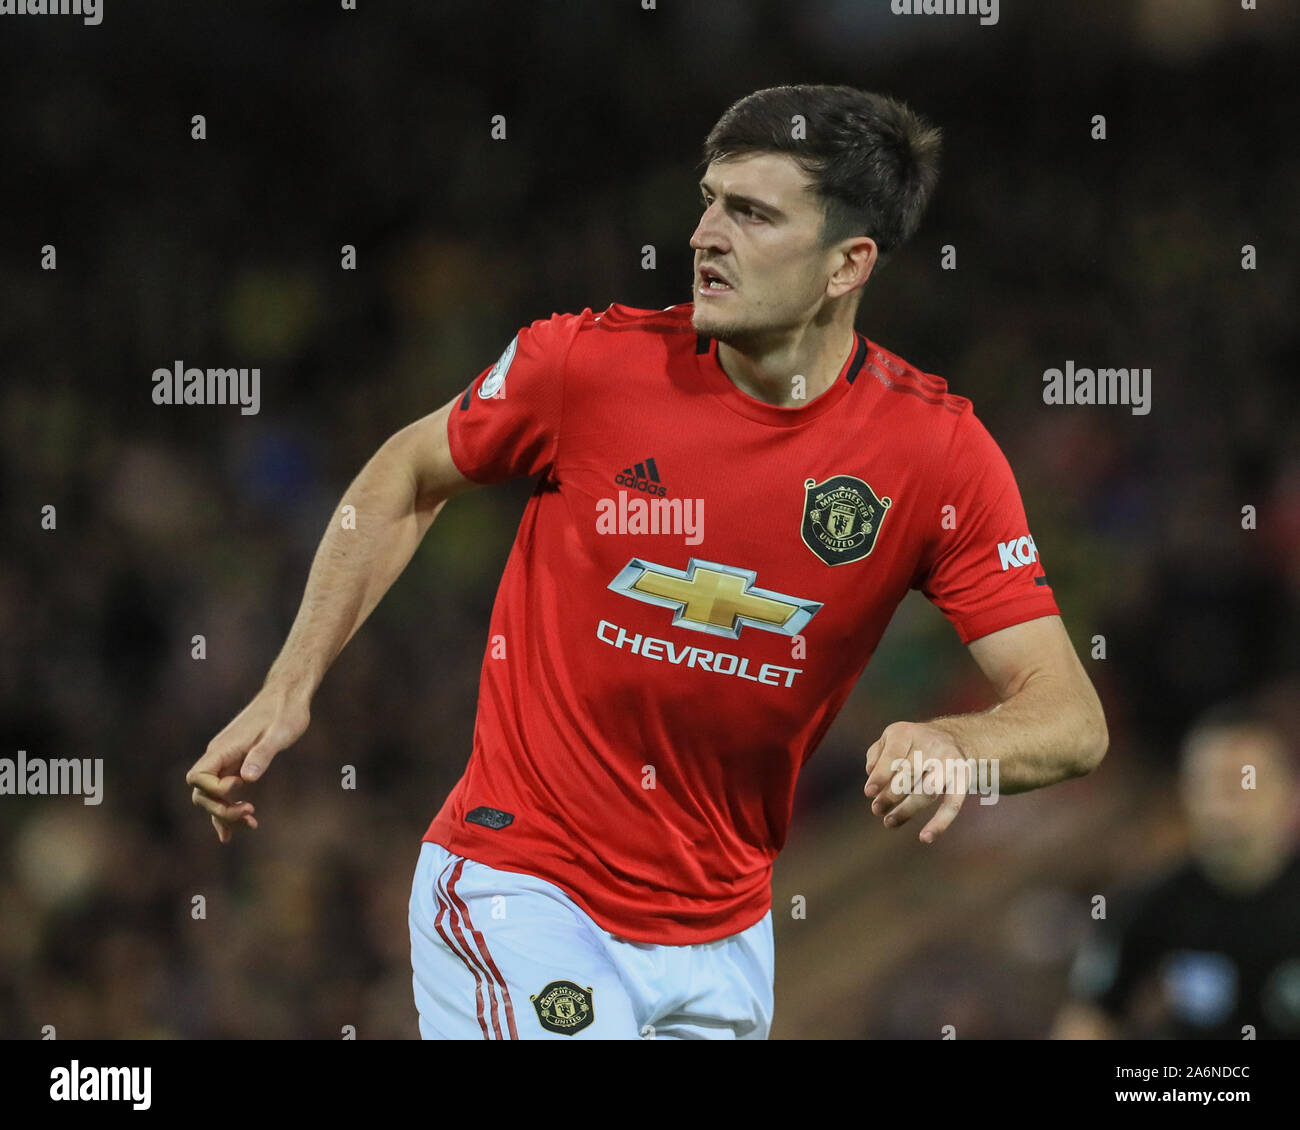 27th October 2019, Carrow Road, Norwich, England; Premier League, Norwich City v Manchester United : Harry Maguire (5) of Manchester United during the game Credit: Mark Cosgrove/News Images Stock Photo